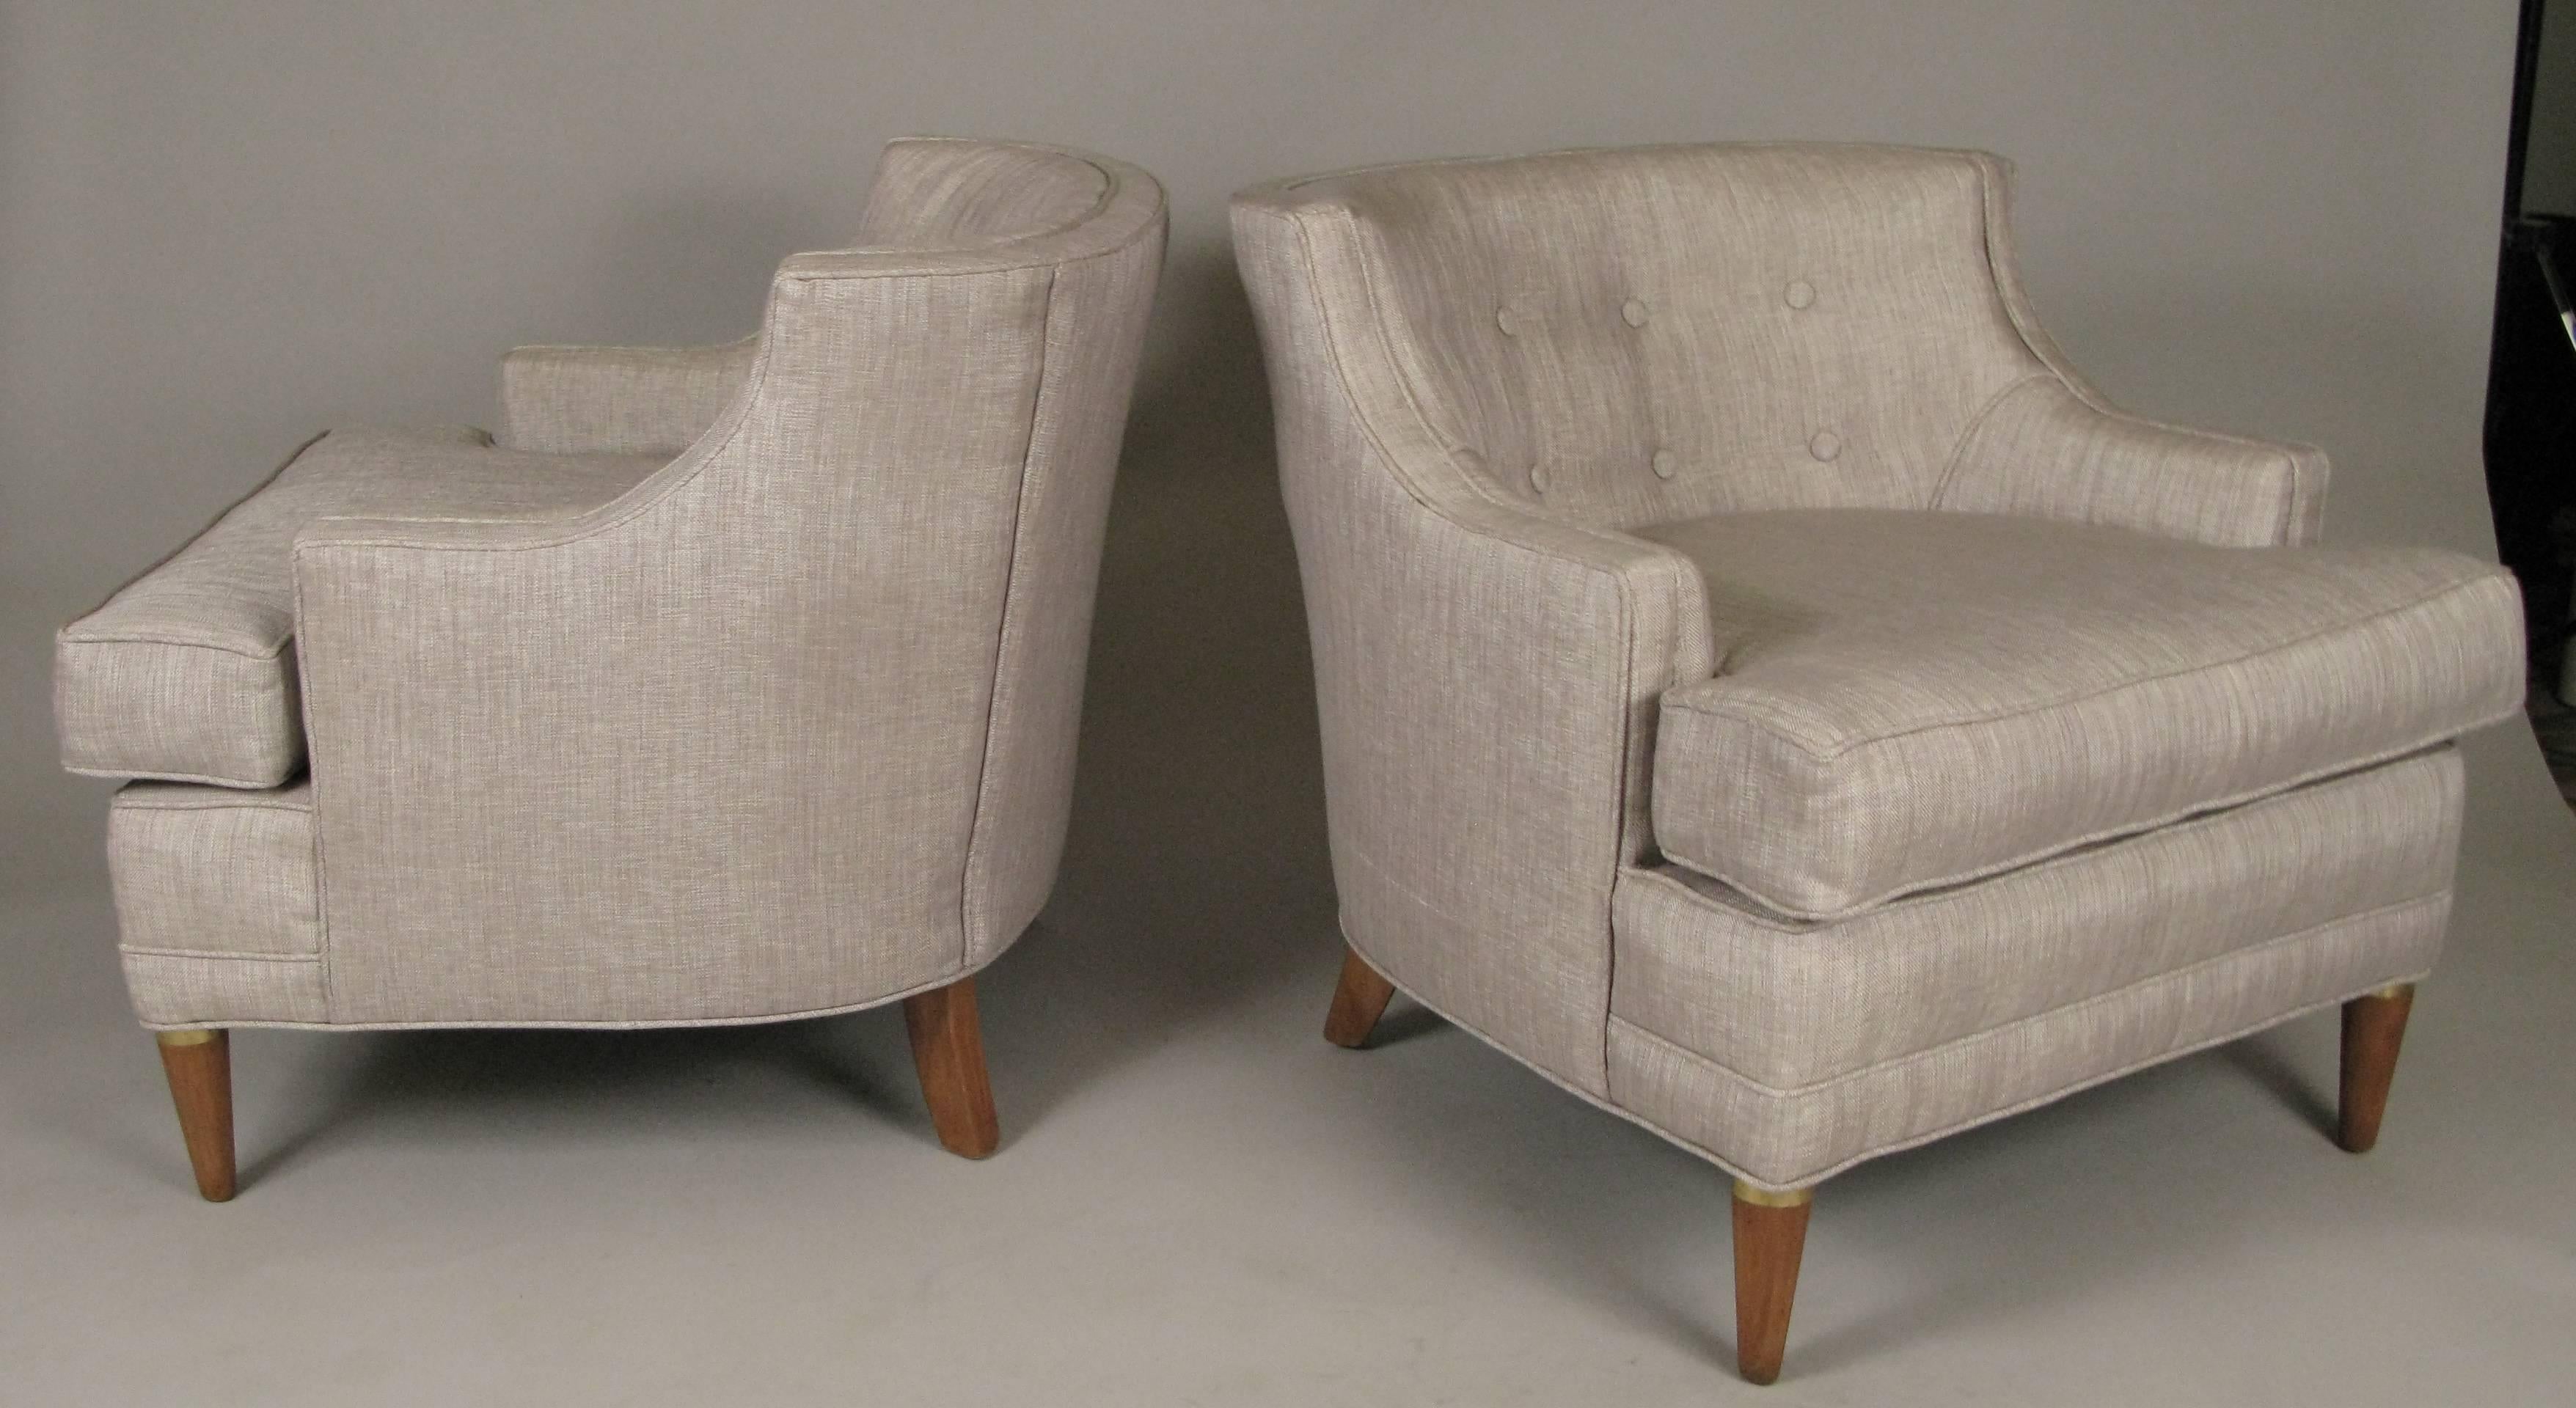 A very charming pair of vintage 1940s curve back lounge chairs, with beautiful scale and proportions. Extremely comfortable, just reupholstered with a very soft silver-grey fabric. Raised on polished walnut legs, with brass details.